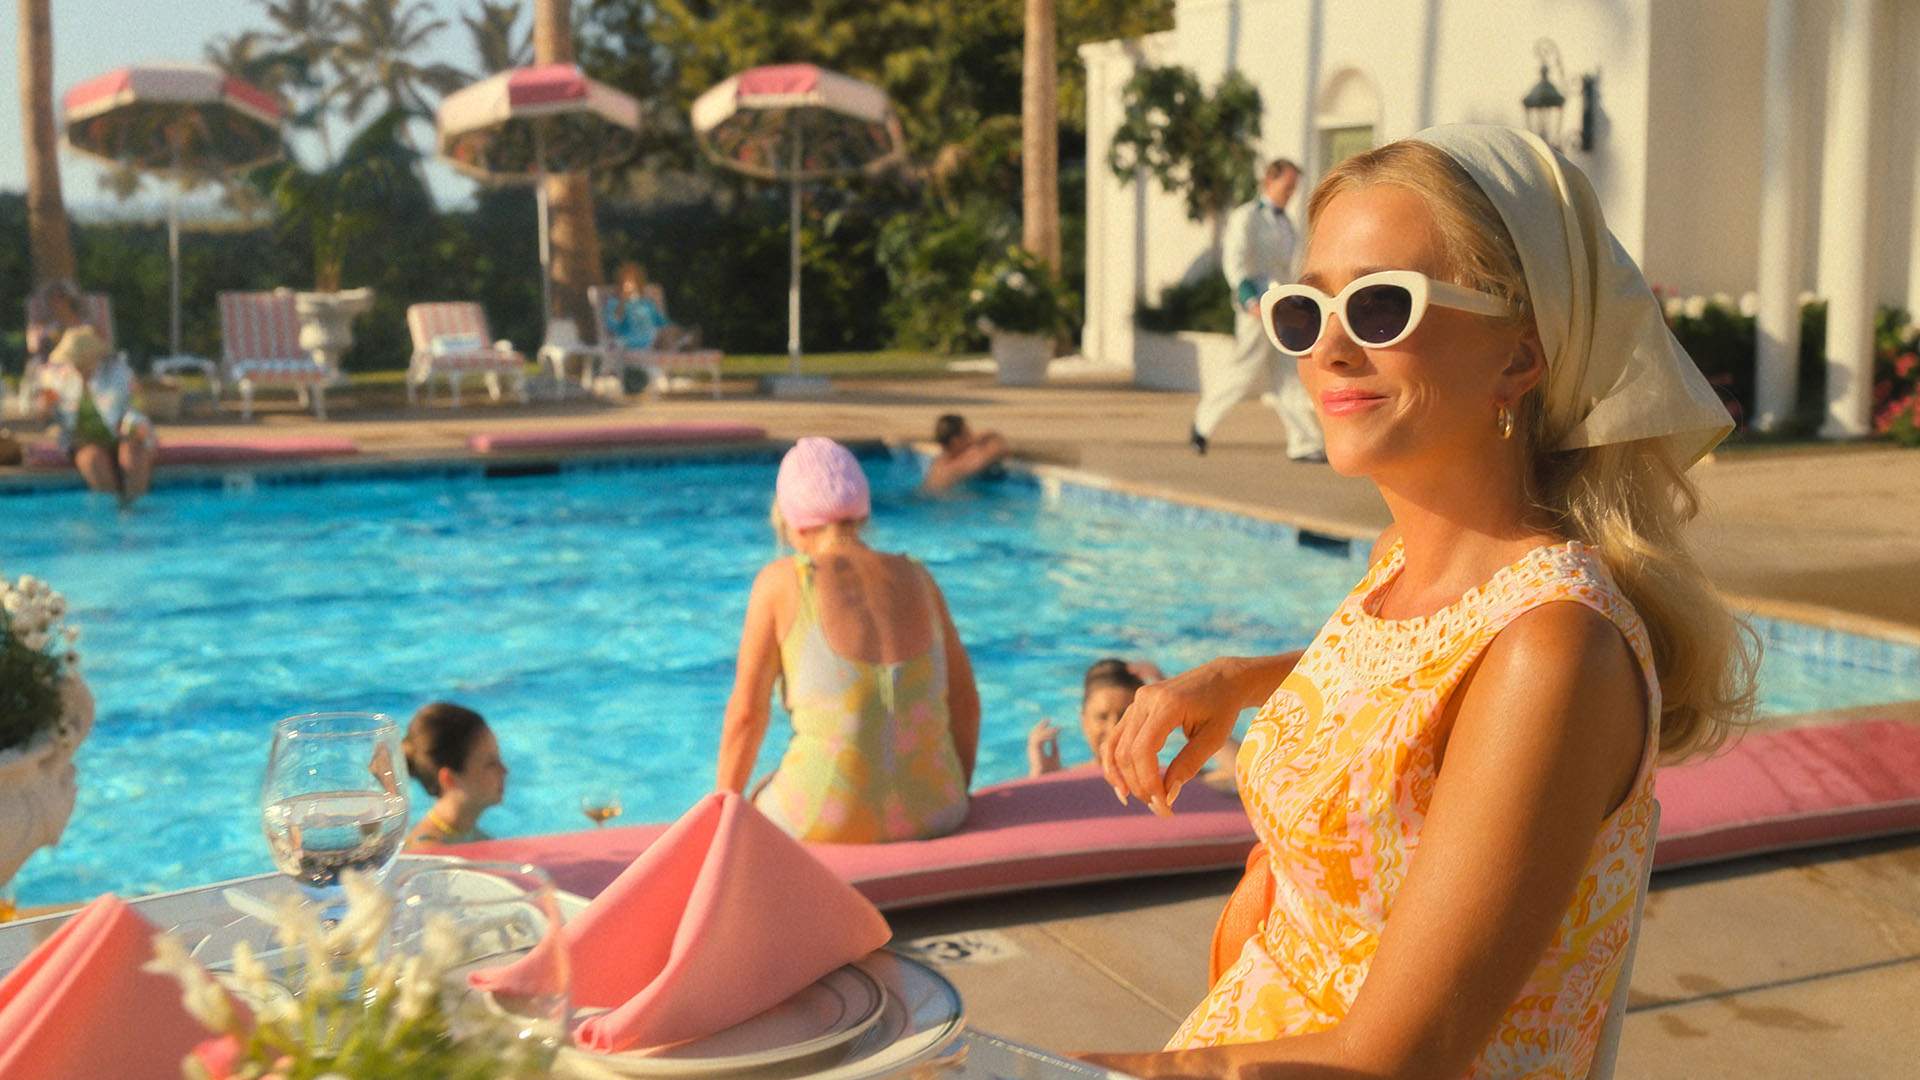 Glossy, Gorgeous and Engaging 60s-Set Dramedy 'Palm Royale' Makes Gleaming Use of Kristen Wiig